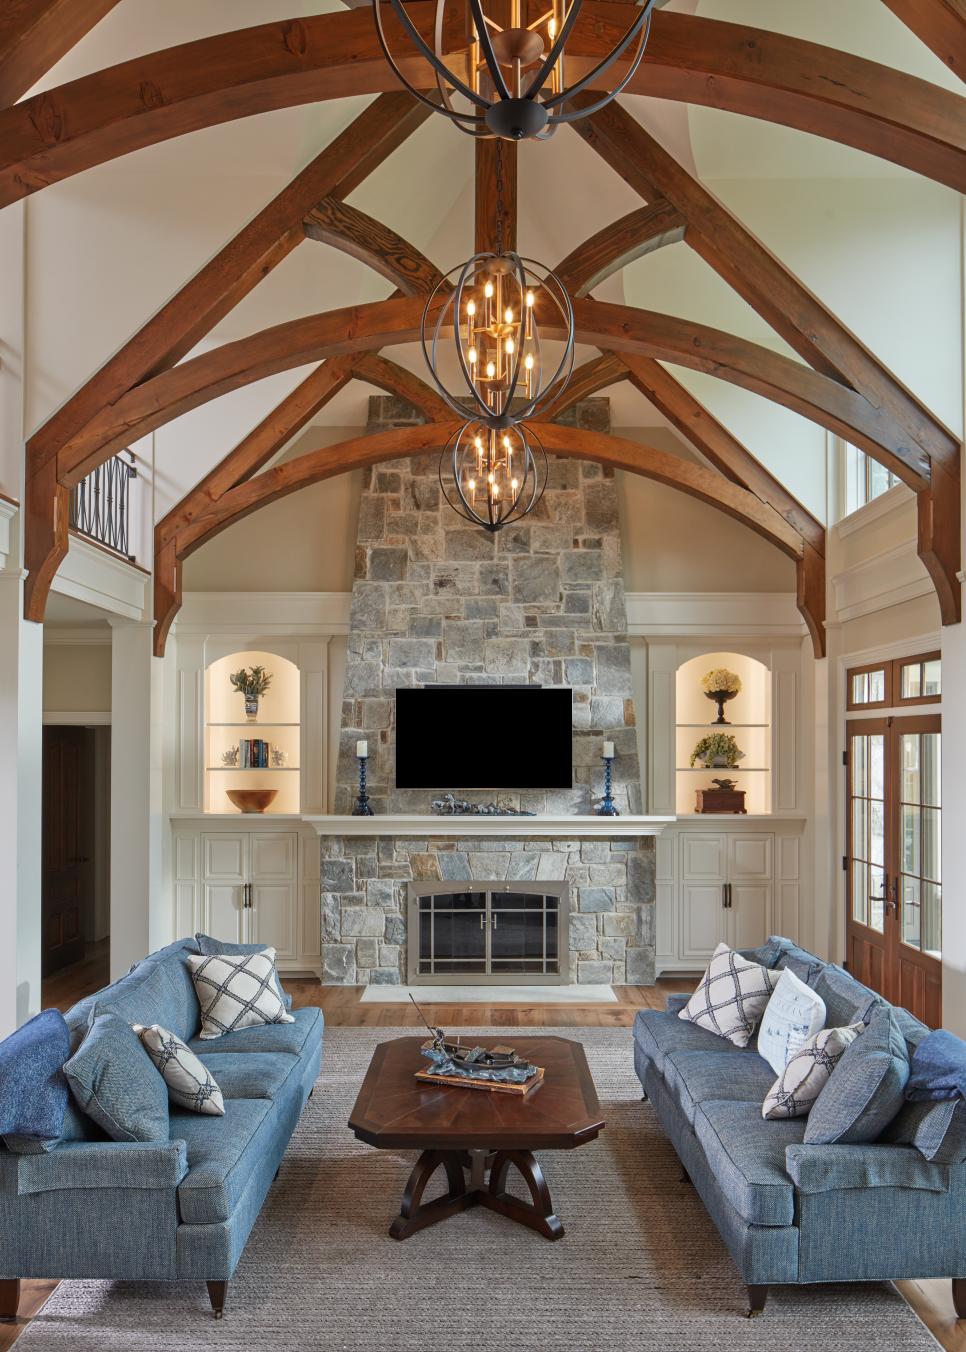 Traditional Living Room With Exposed Beams | HGTV